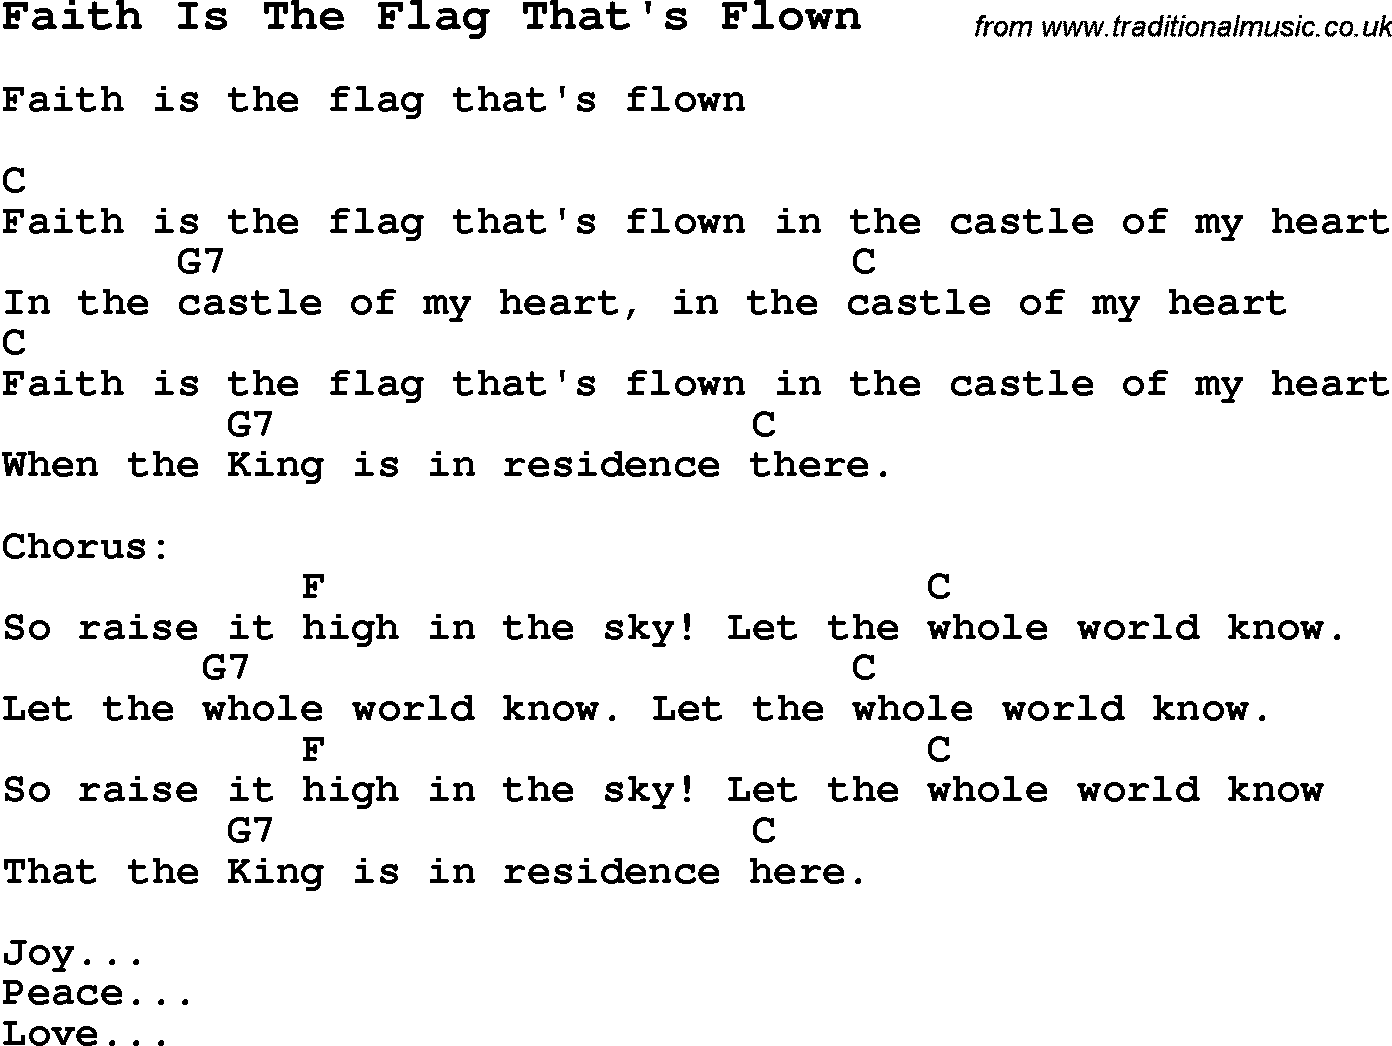 Summer-Camp Song, Faith Is The Flag That's Flown, with lyrics and chords for Ukulele, Guitar Banjo etc.